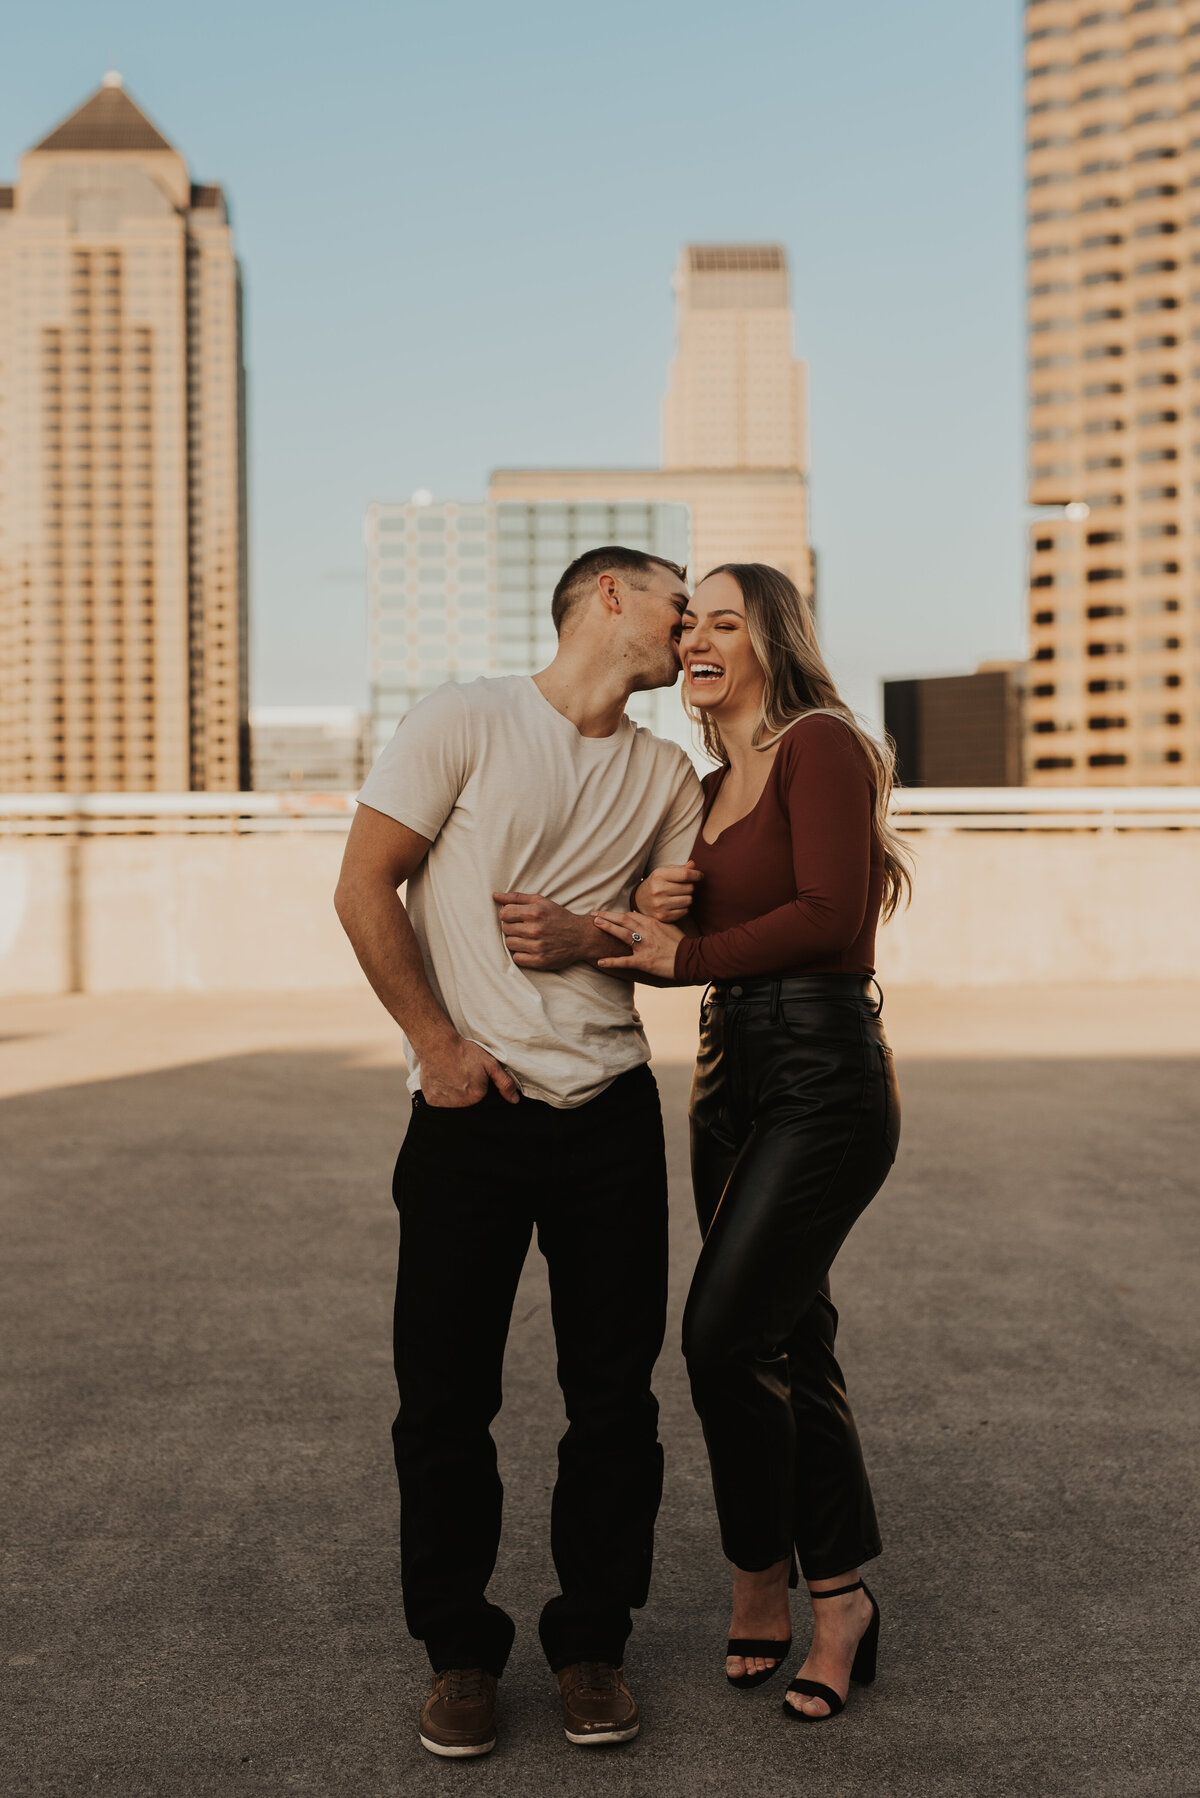 Stephanie-and-trent-engagement-session-at-downtown-dallas-texas-by-bruna-kitchen-photography-60